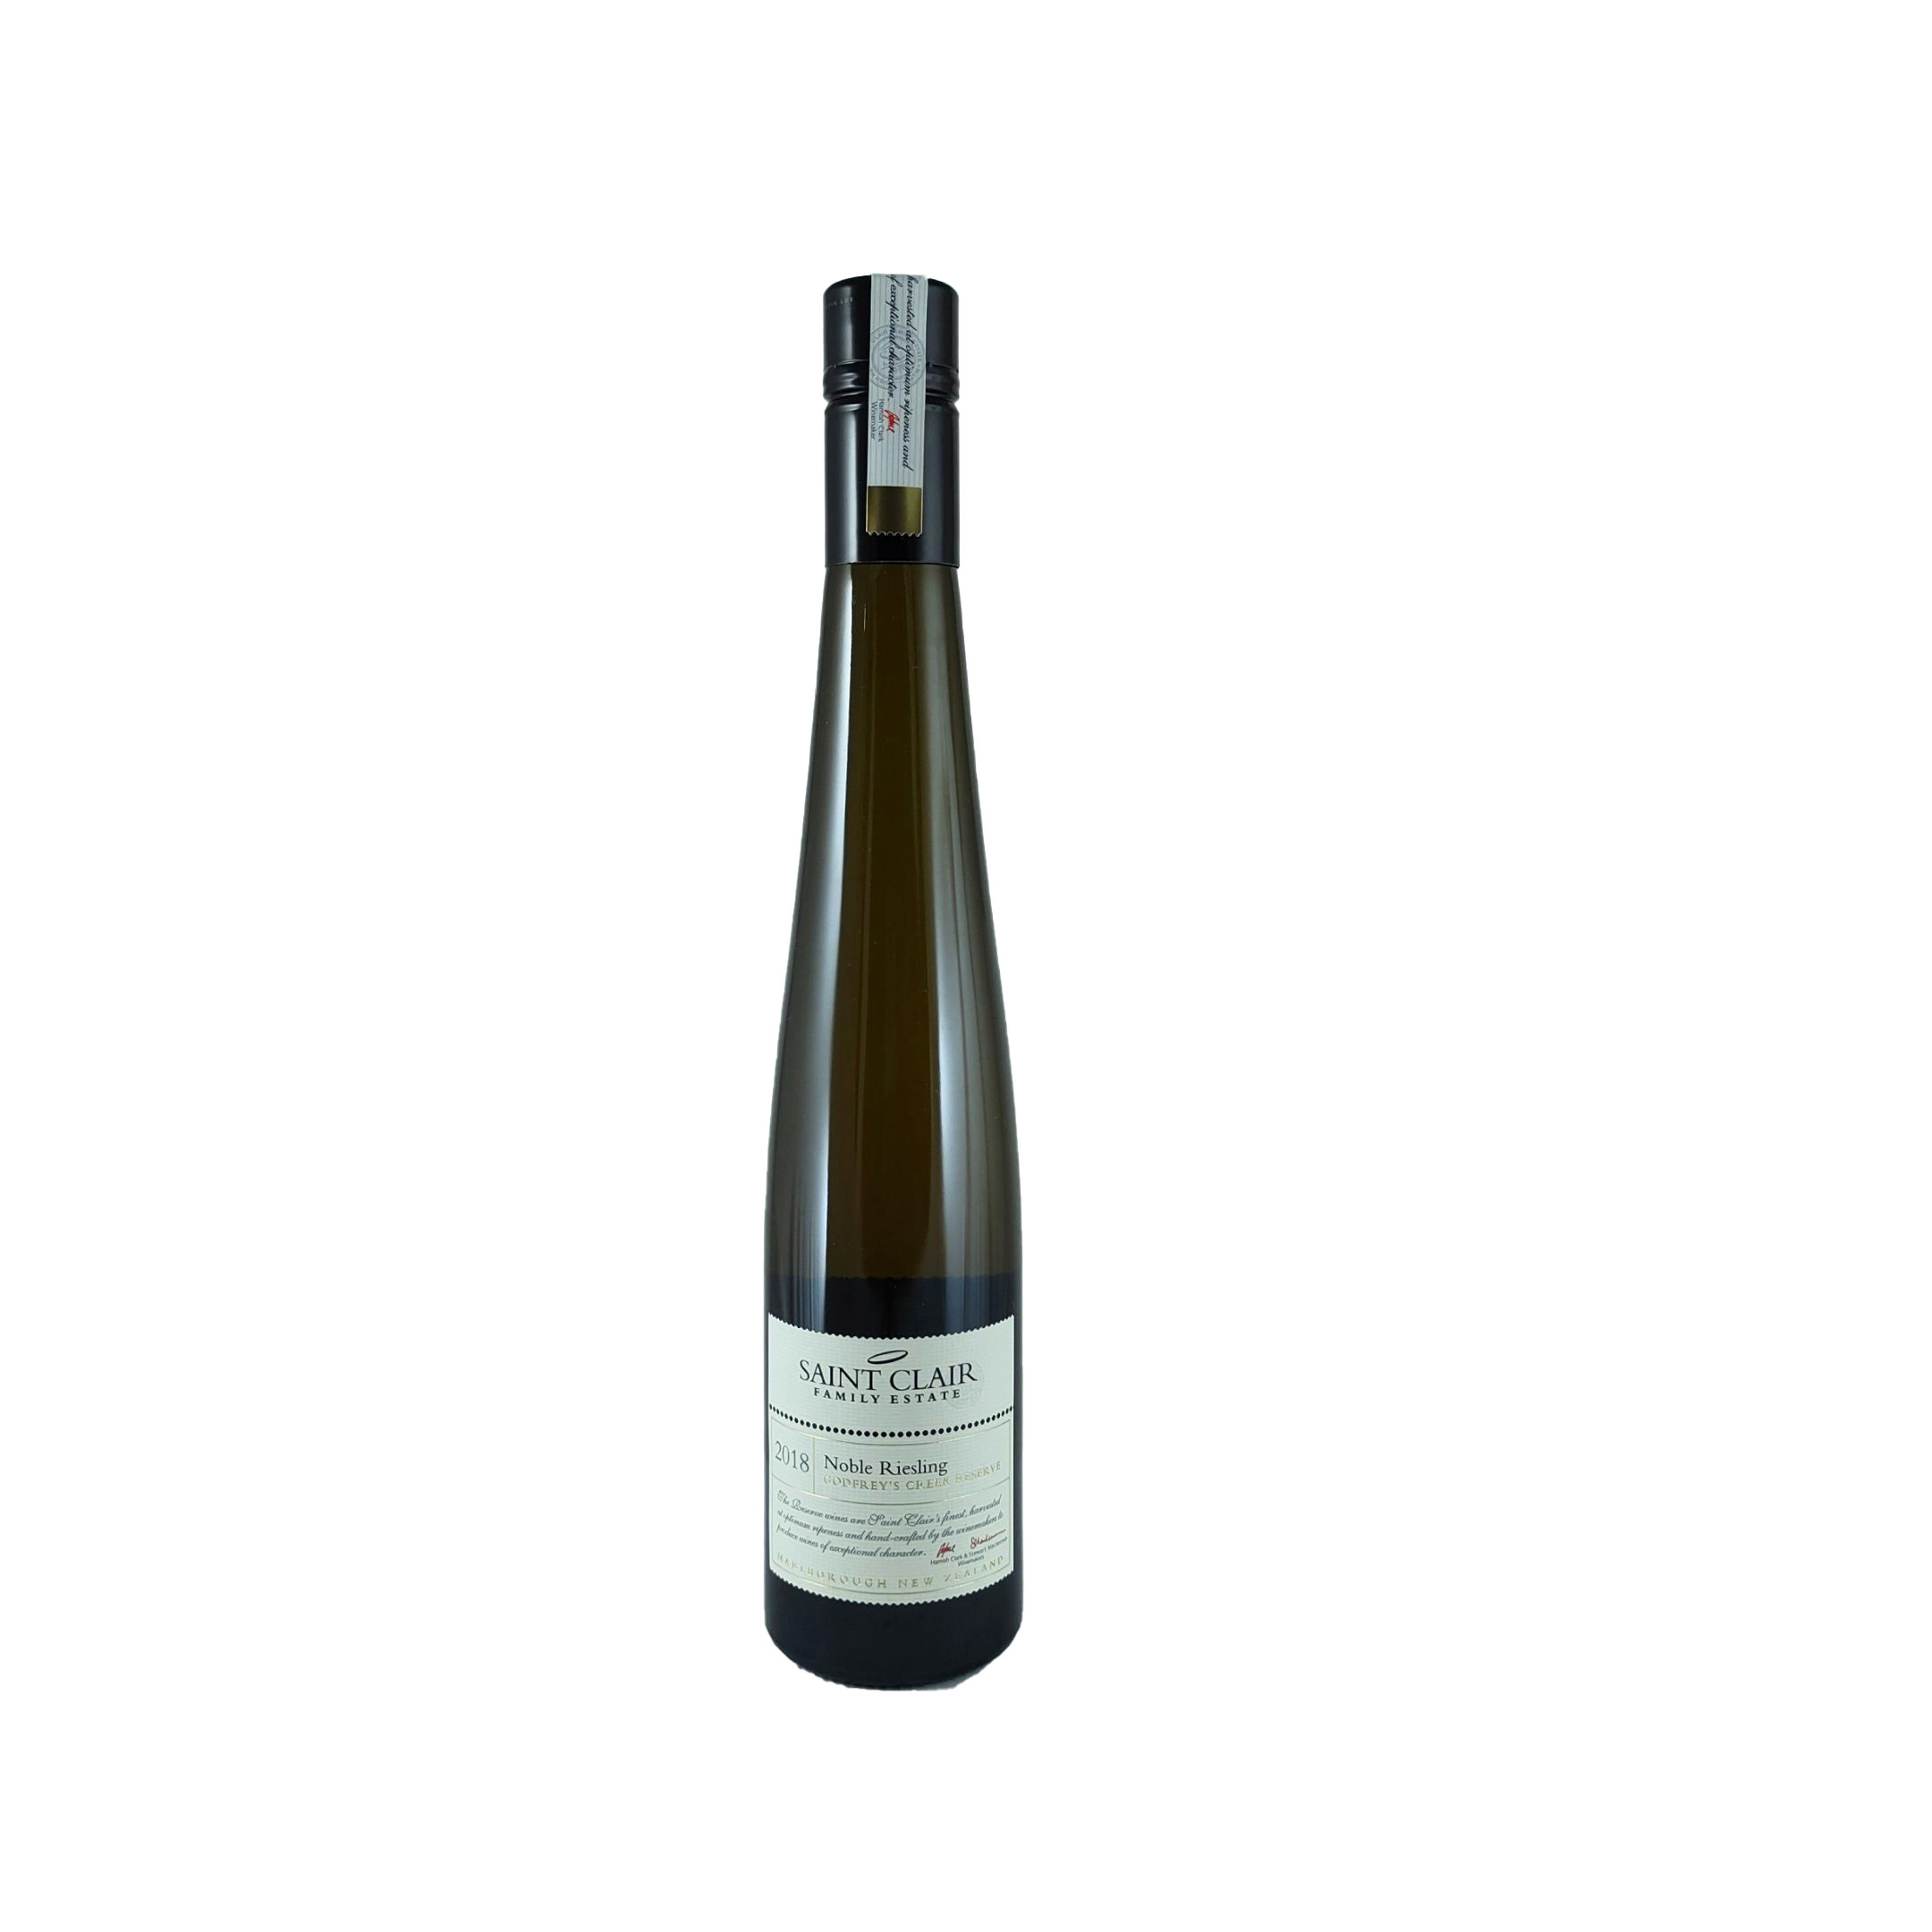 Saint Clair – Godfrey’s Creek Noble Riesling 2018  (37,5 cl)